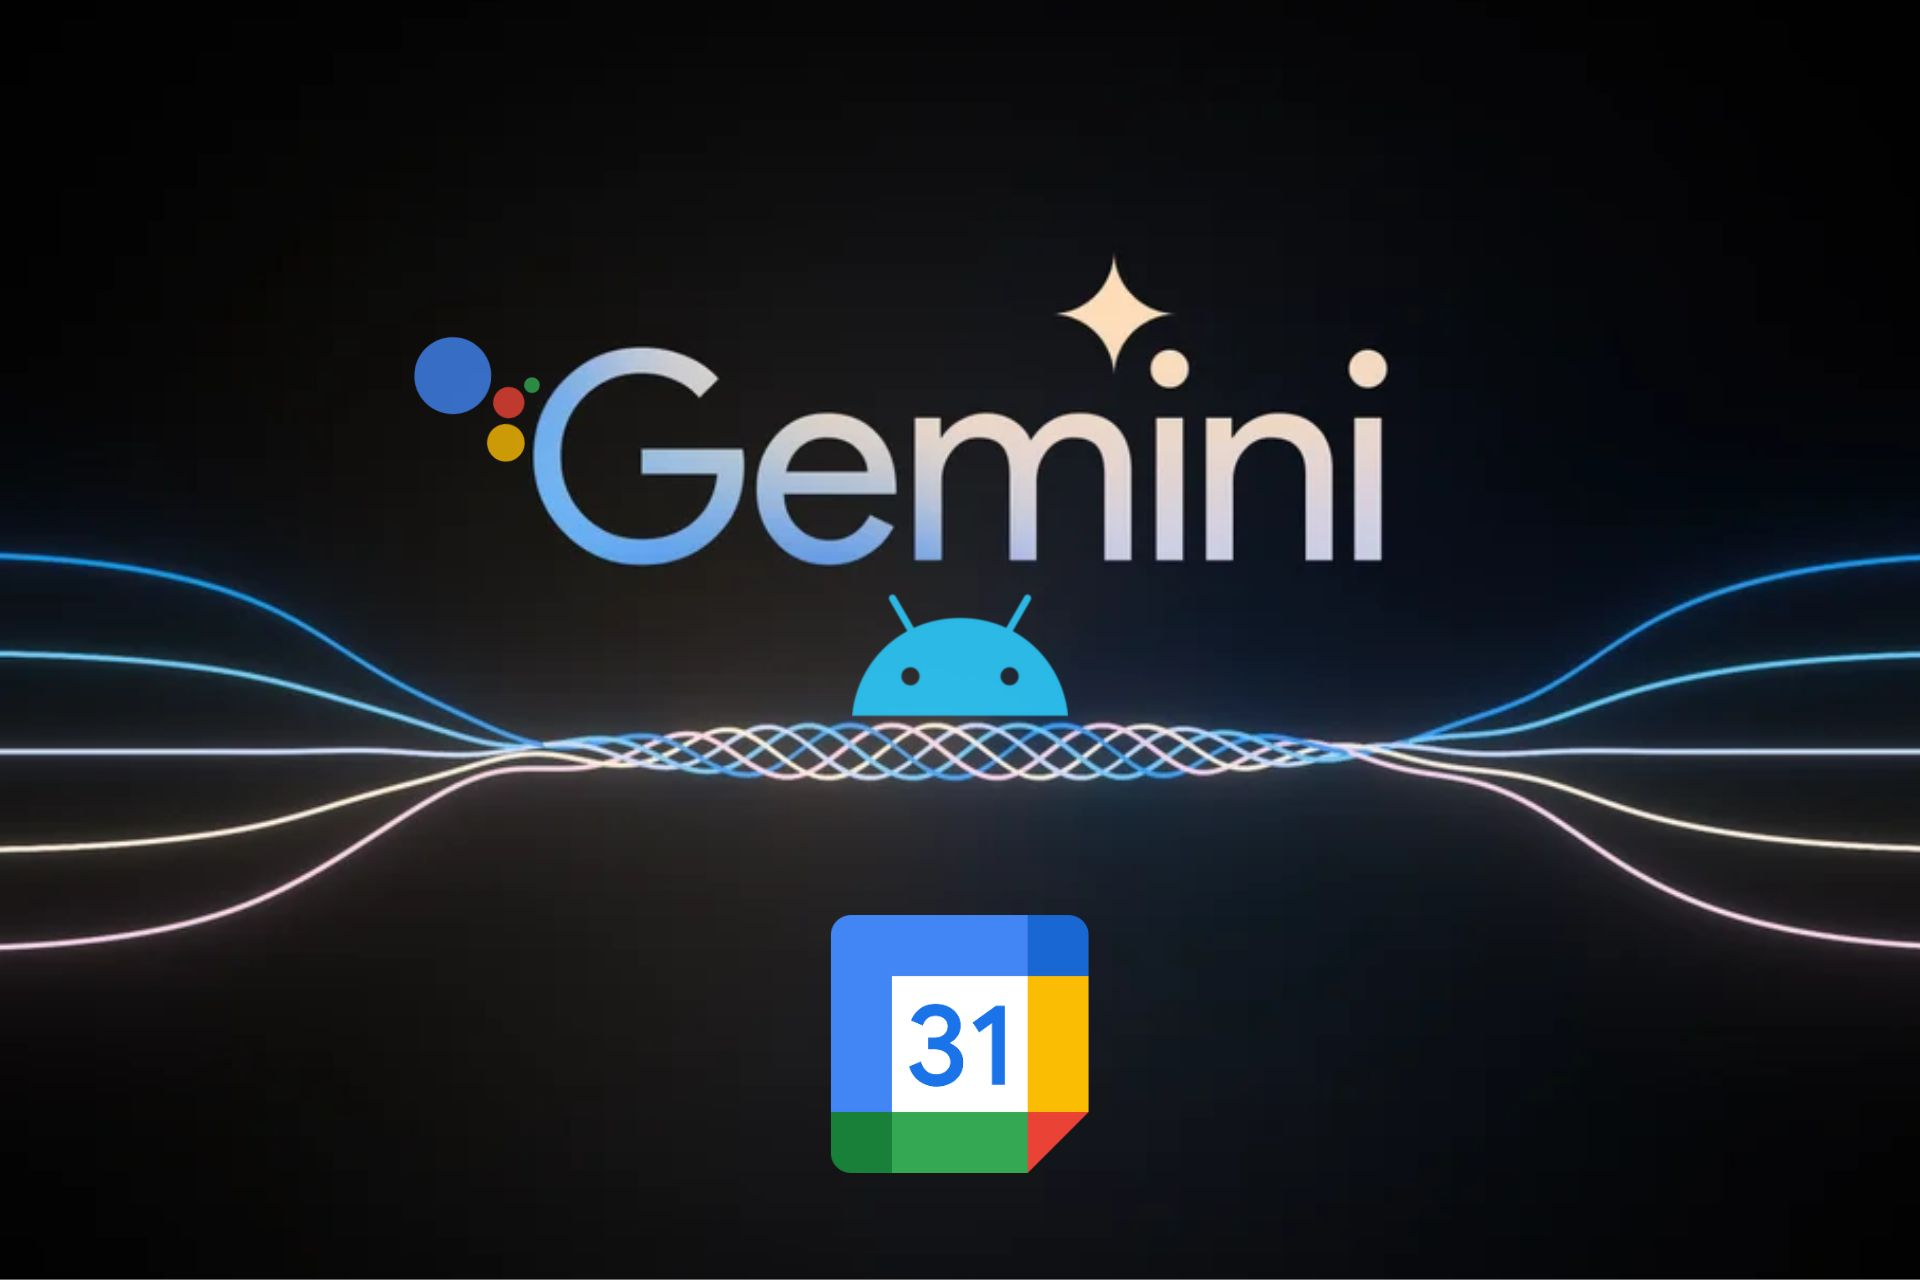 Gemini for Android next to logos from Google Calendar and Assistant